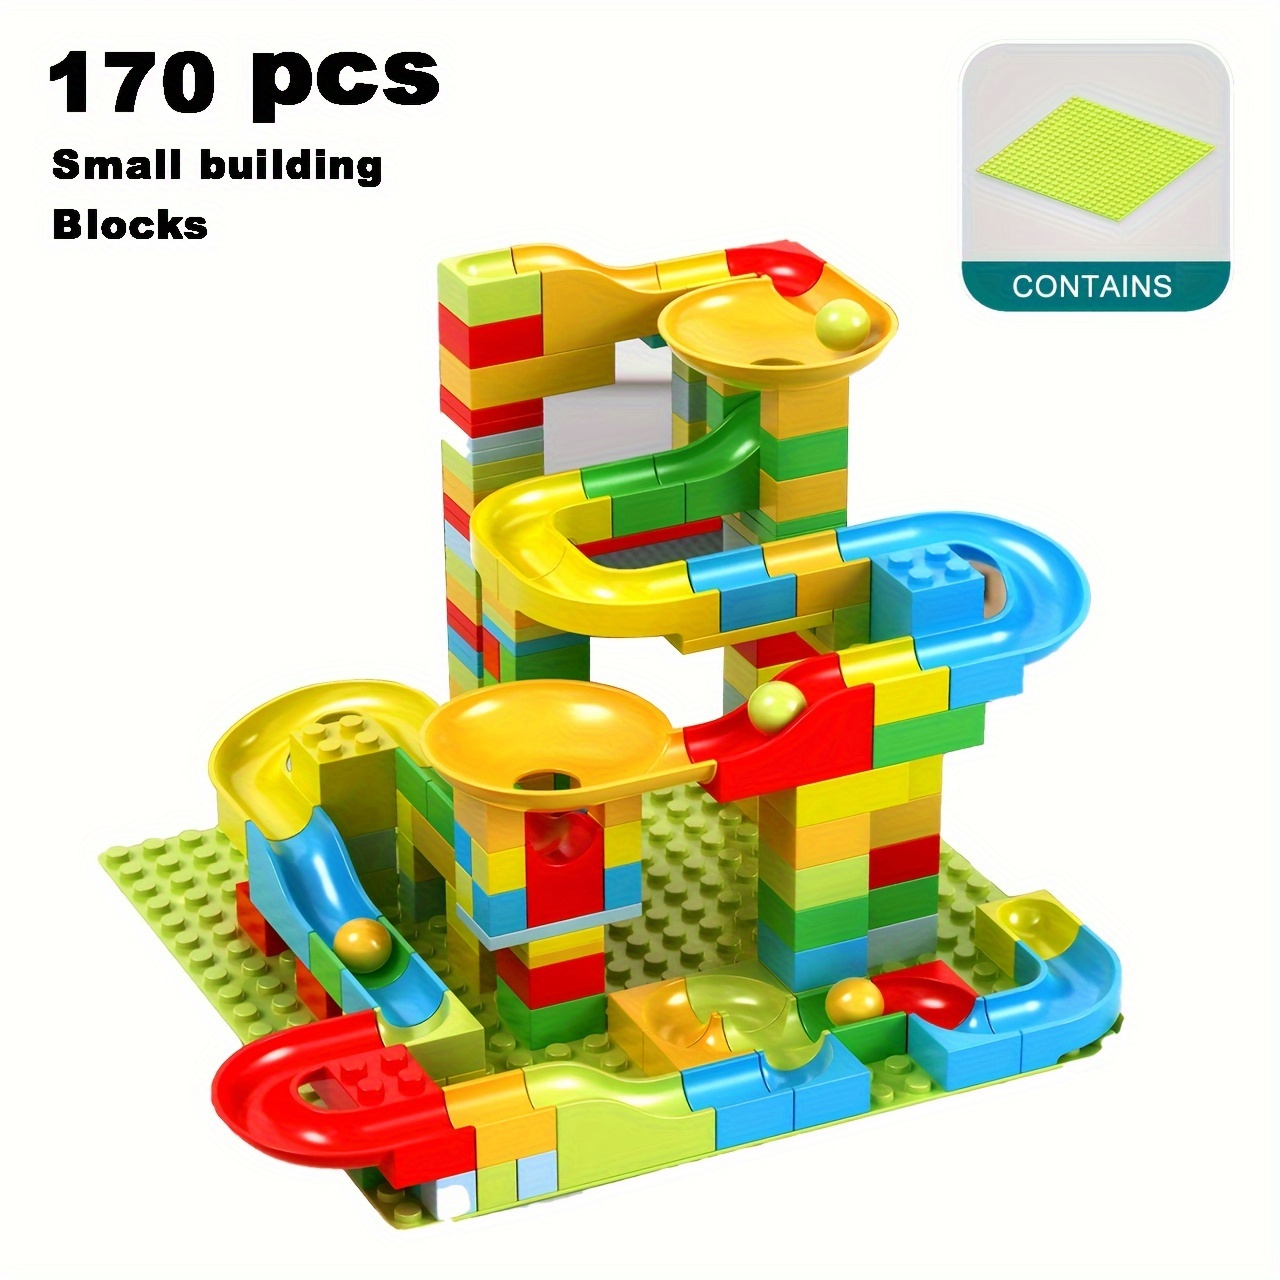 

170pcs Small Building Blocks, Children's Assembled Model, Boys And Girls Boys Intelligence Educational Toys With Base Plate, 3 Years Old +